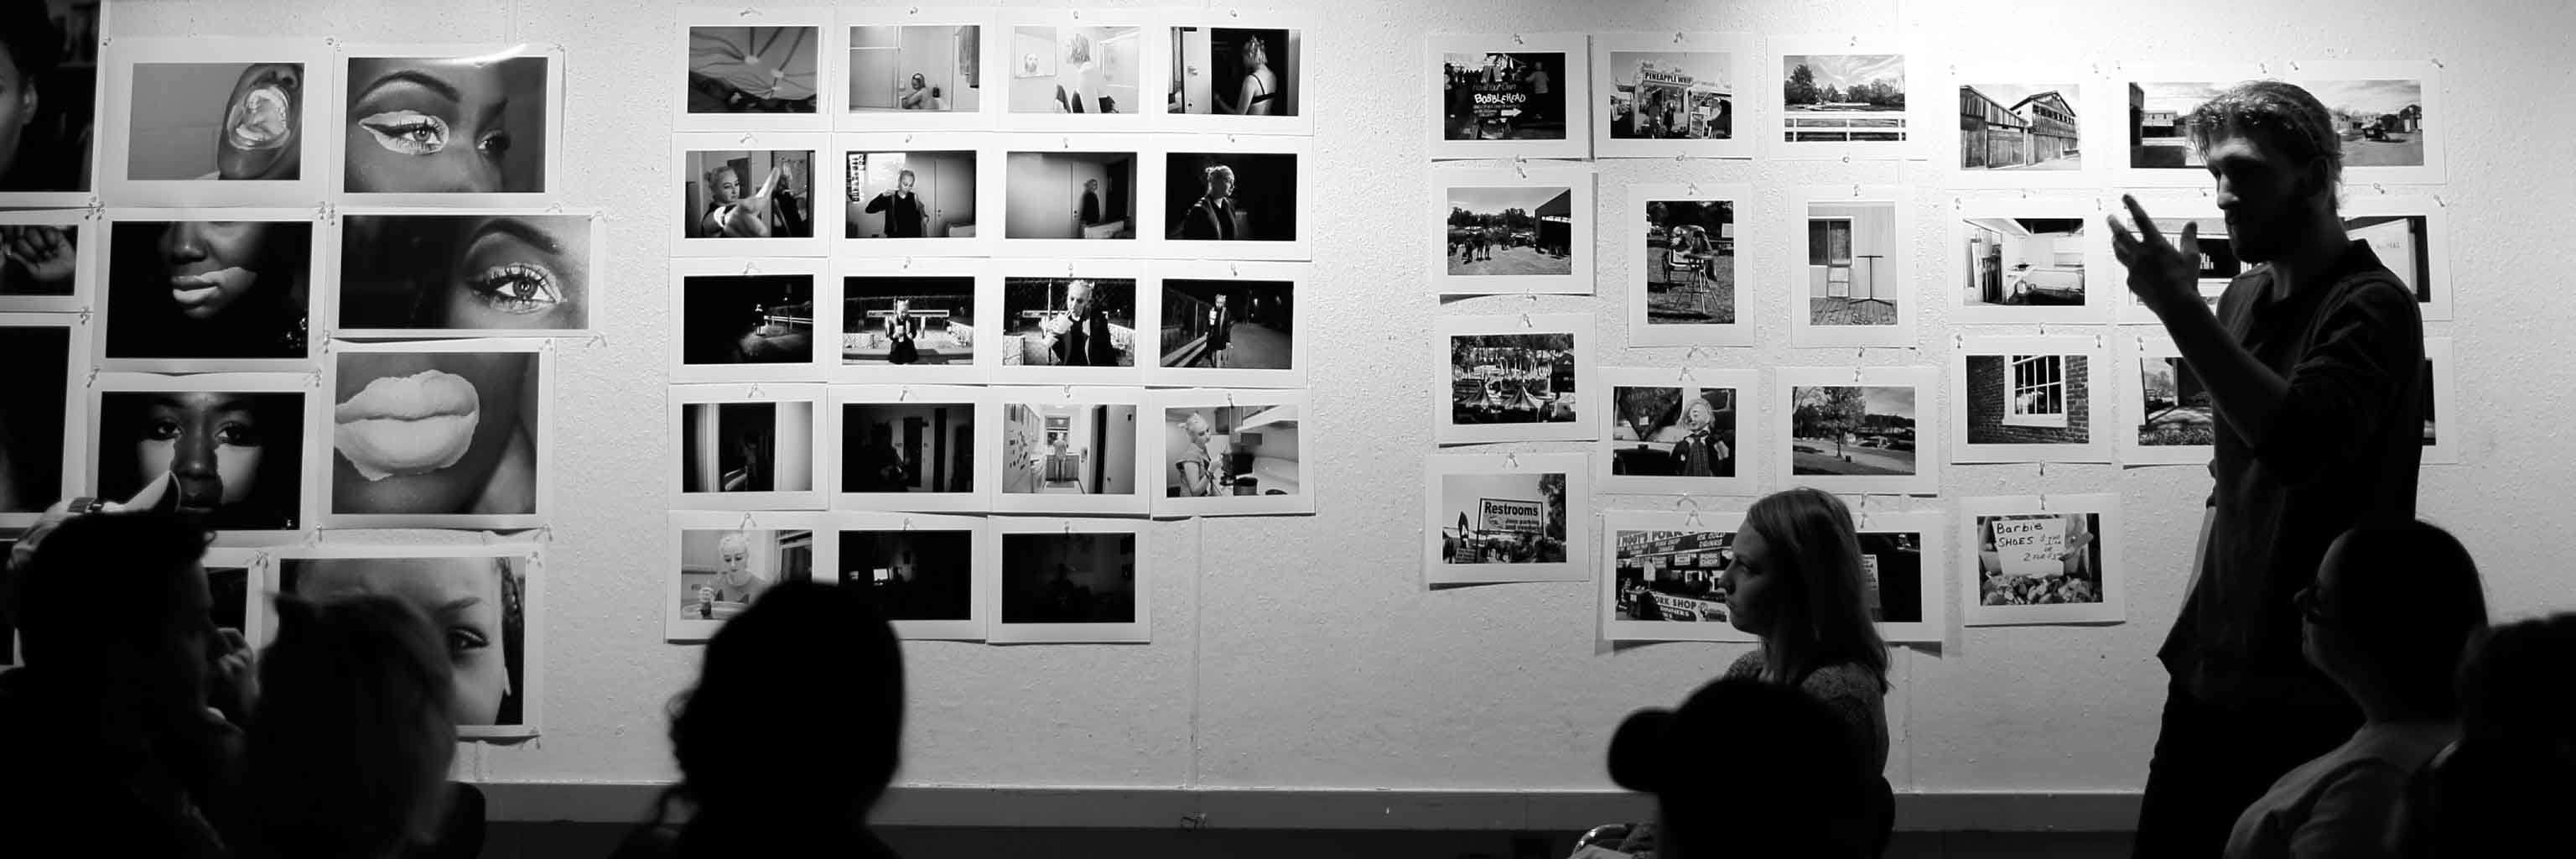 A wall of black and white photos